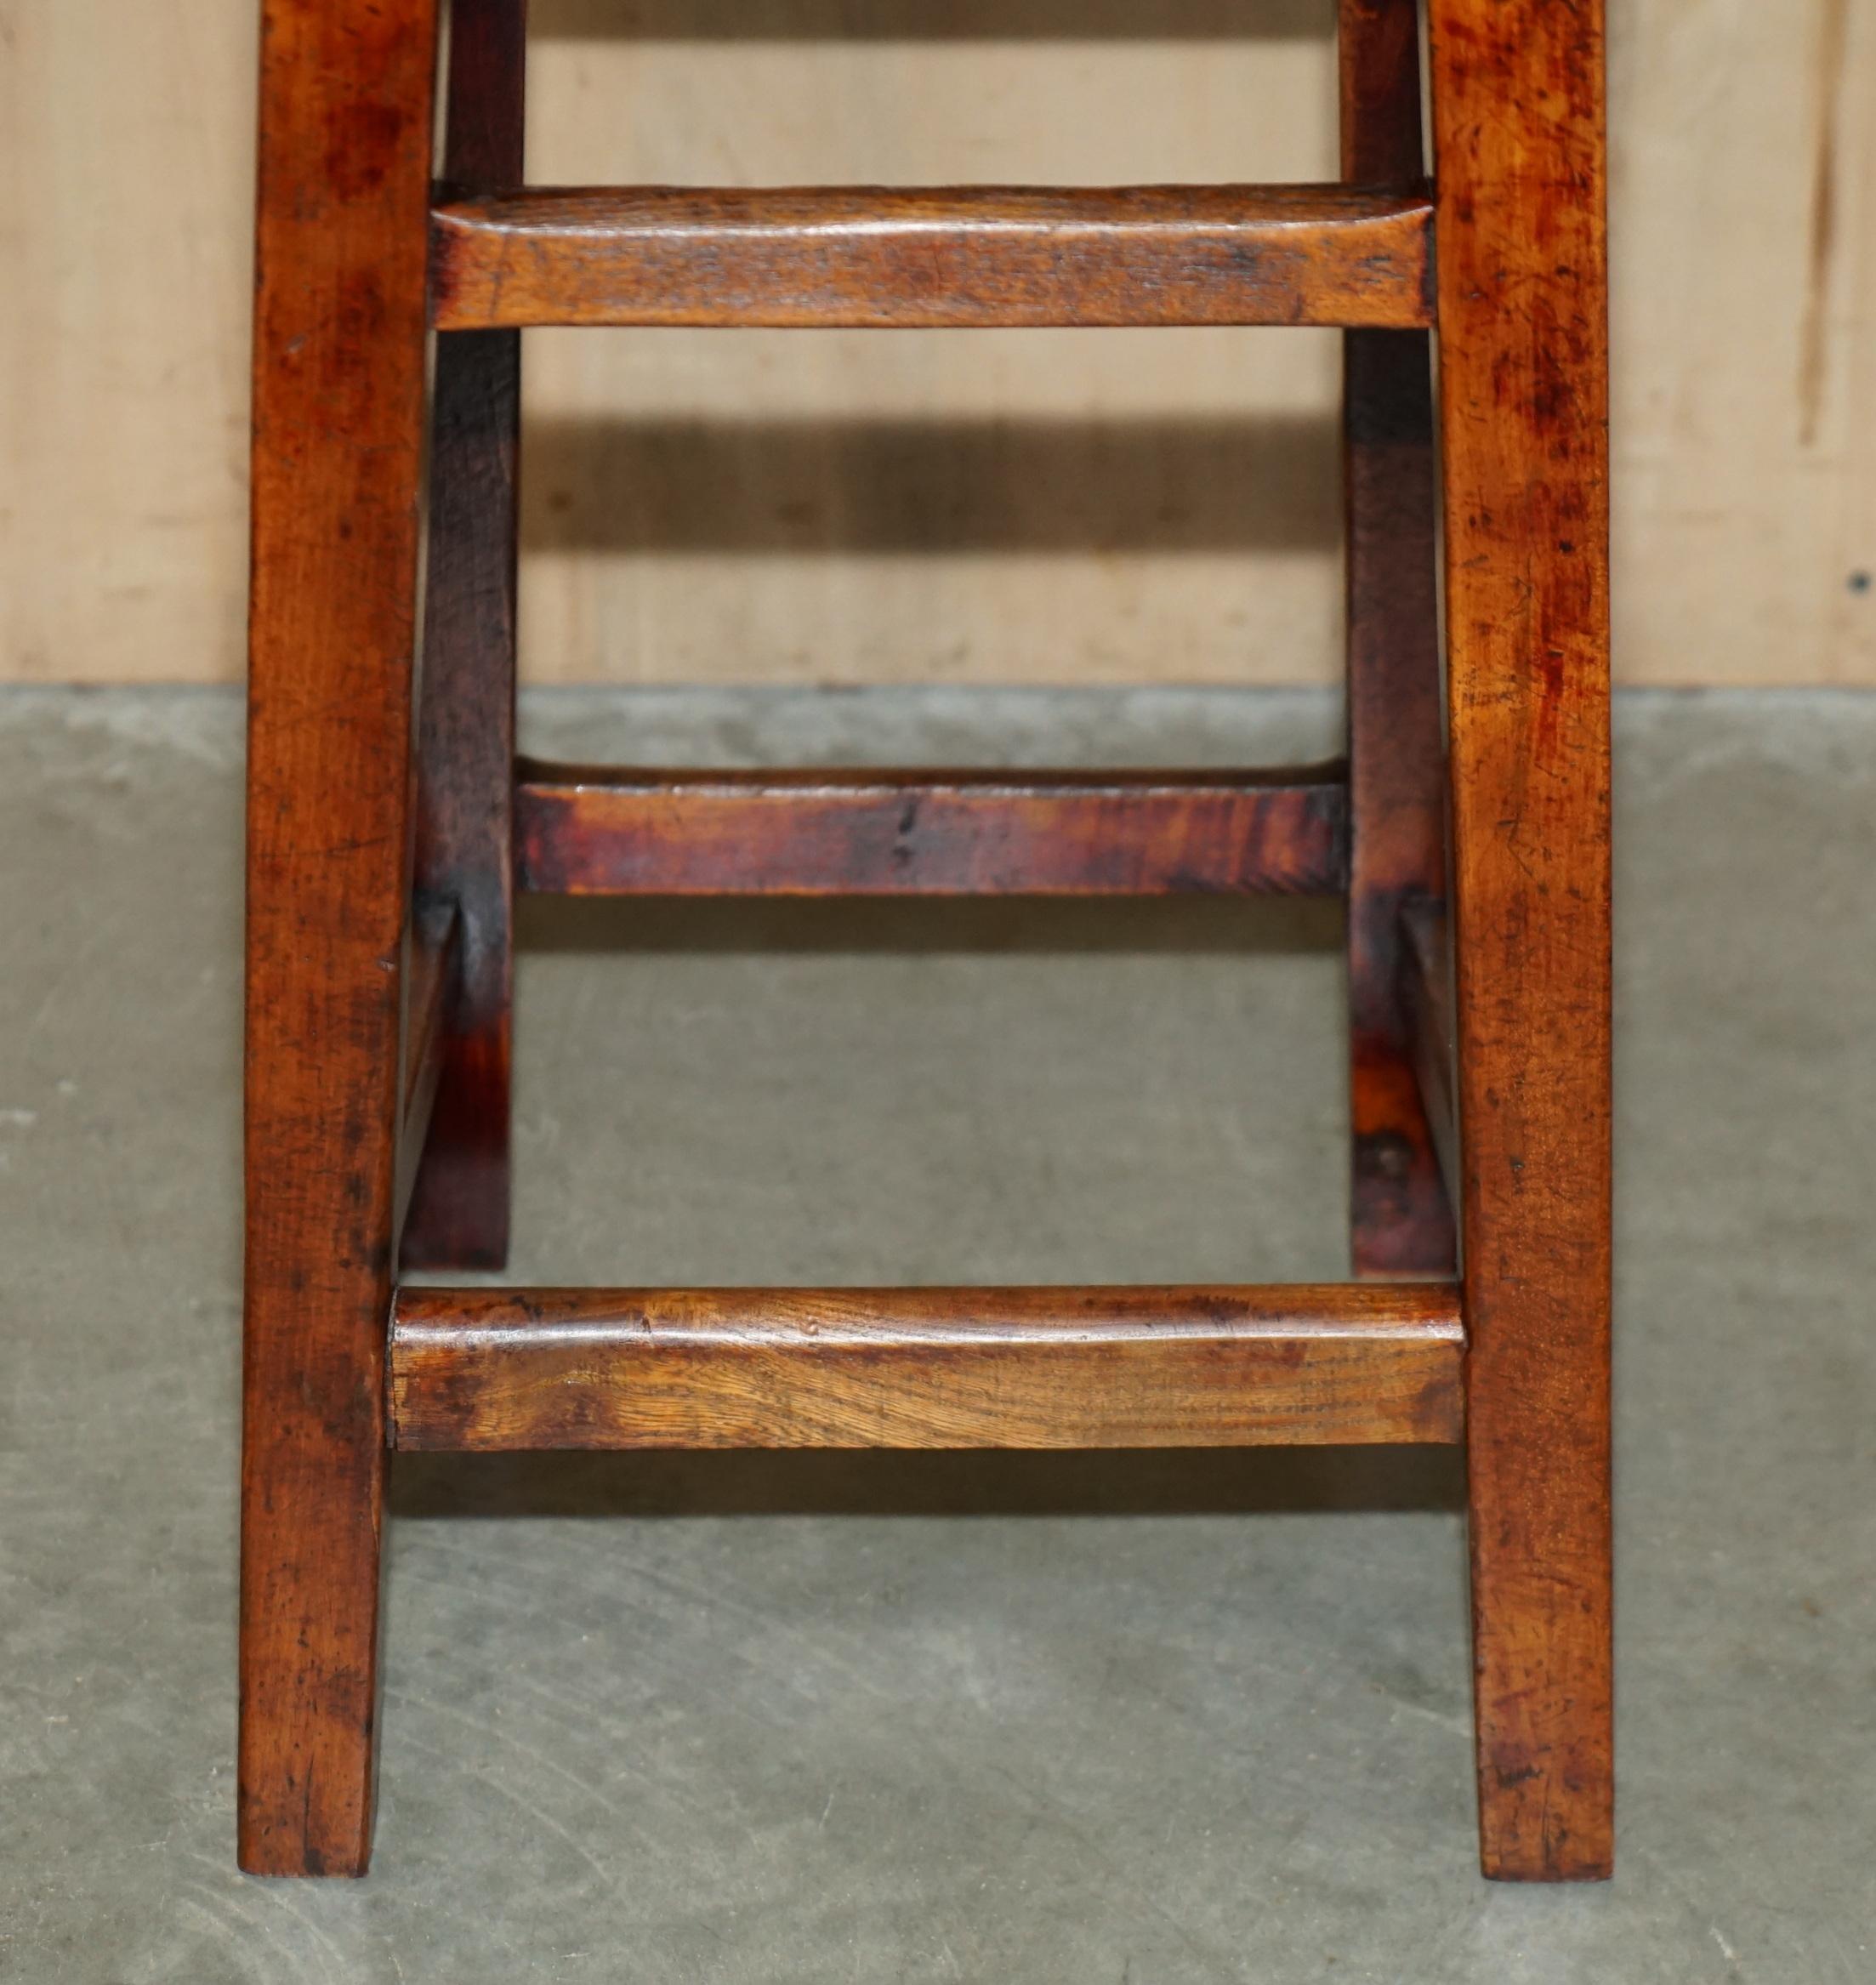 Fruitwood EXQUISITE CIRCA 1880 HAND MADE FRUiTWOOD DRAFTSMAN ARTIST STOOL STUNNING PATINA For Sale